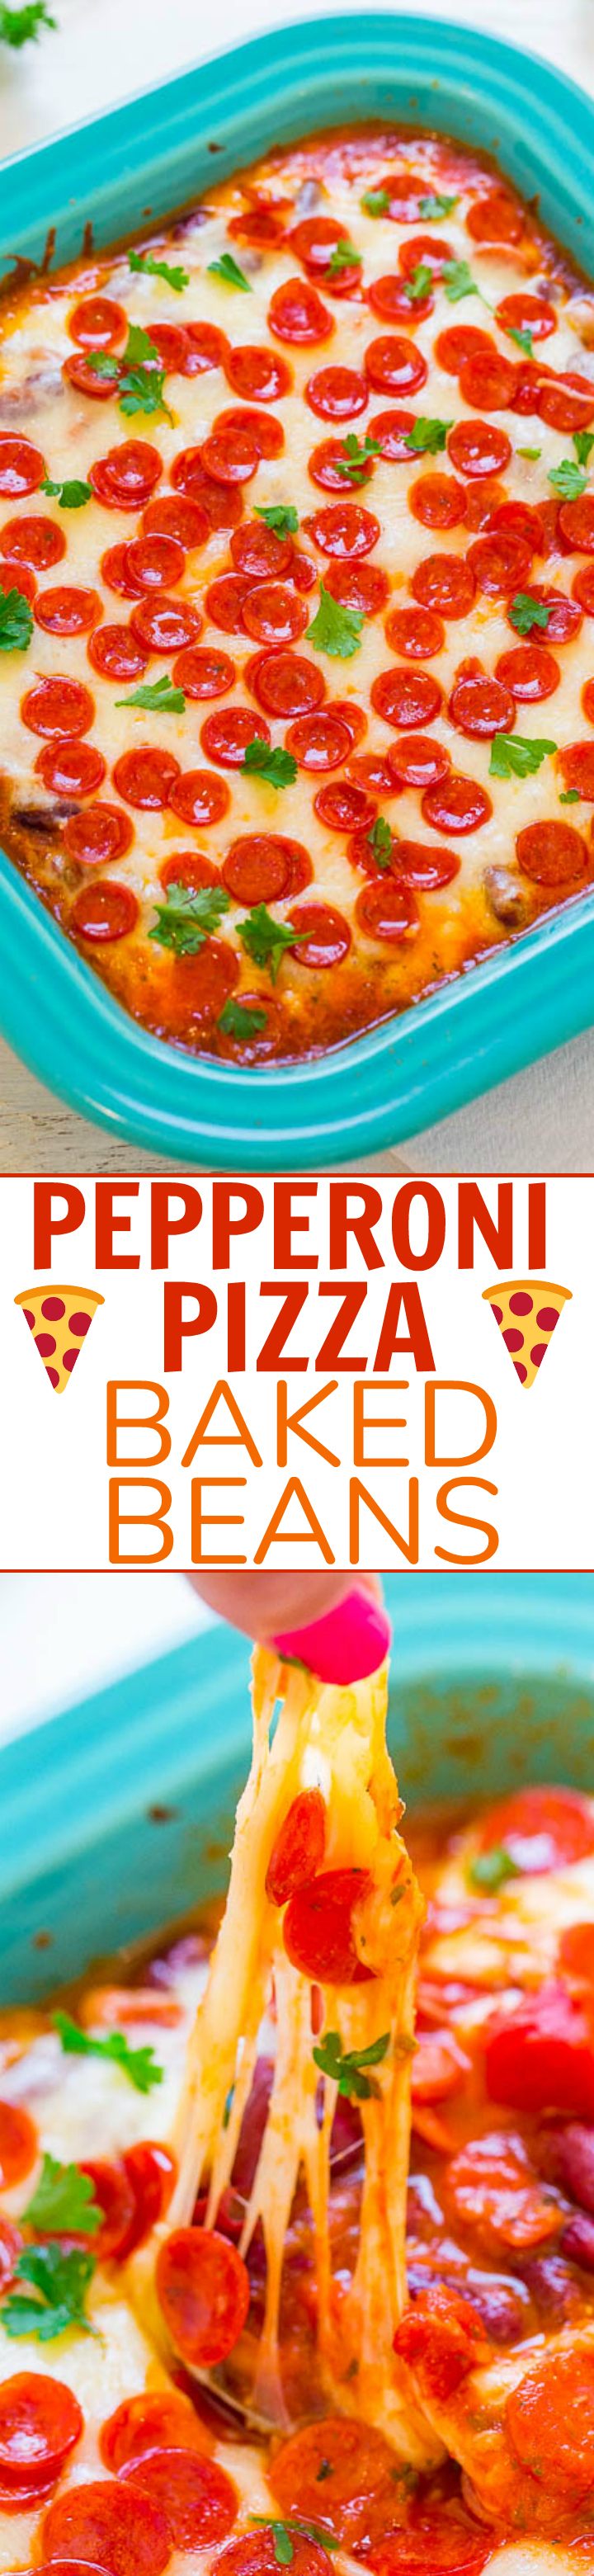 Pepperoni Pizza Baked Beans - PIZZA-inspired flavors in this EASY recipe that works great as an appetizer, side dish, or FAST weeknight dinner!! Tomatoes, oregano, pepperoni, and oodles of melted CHEESE!!